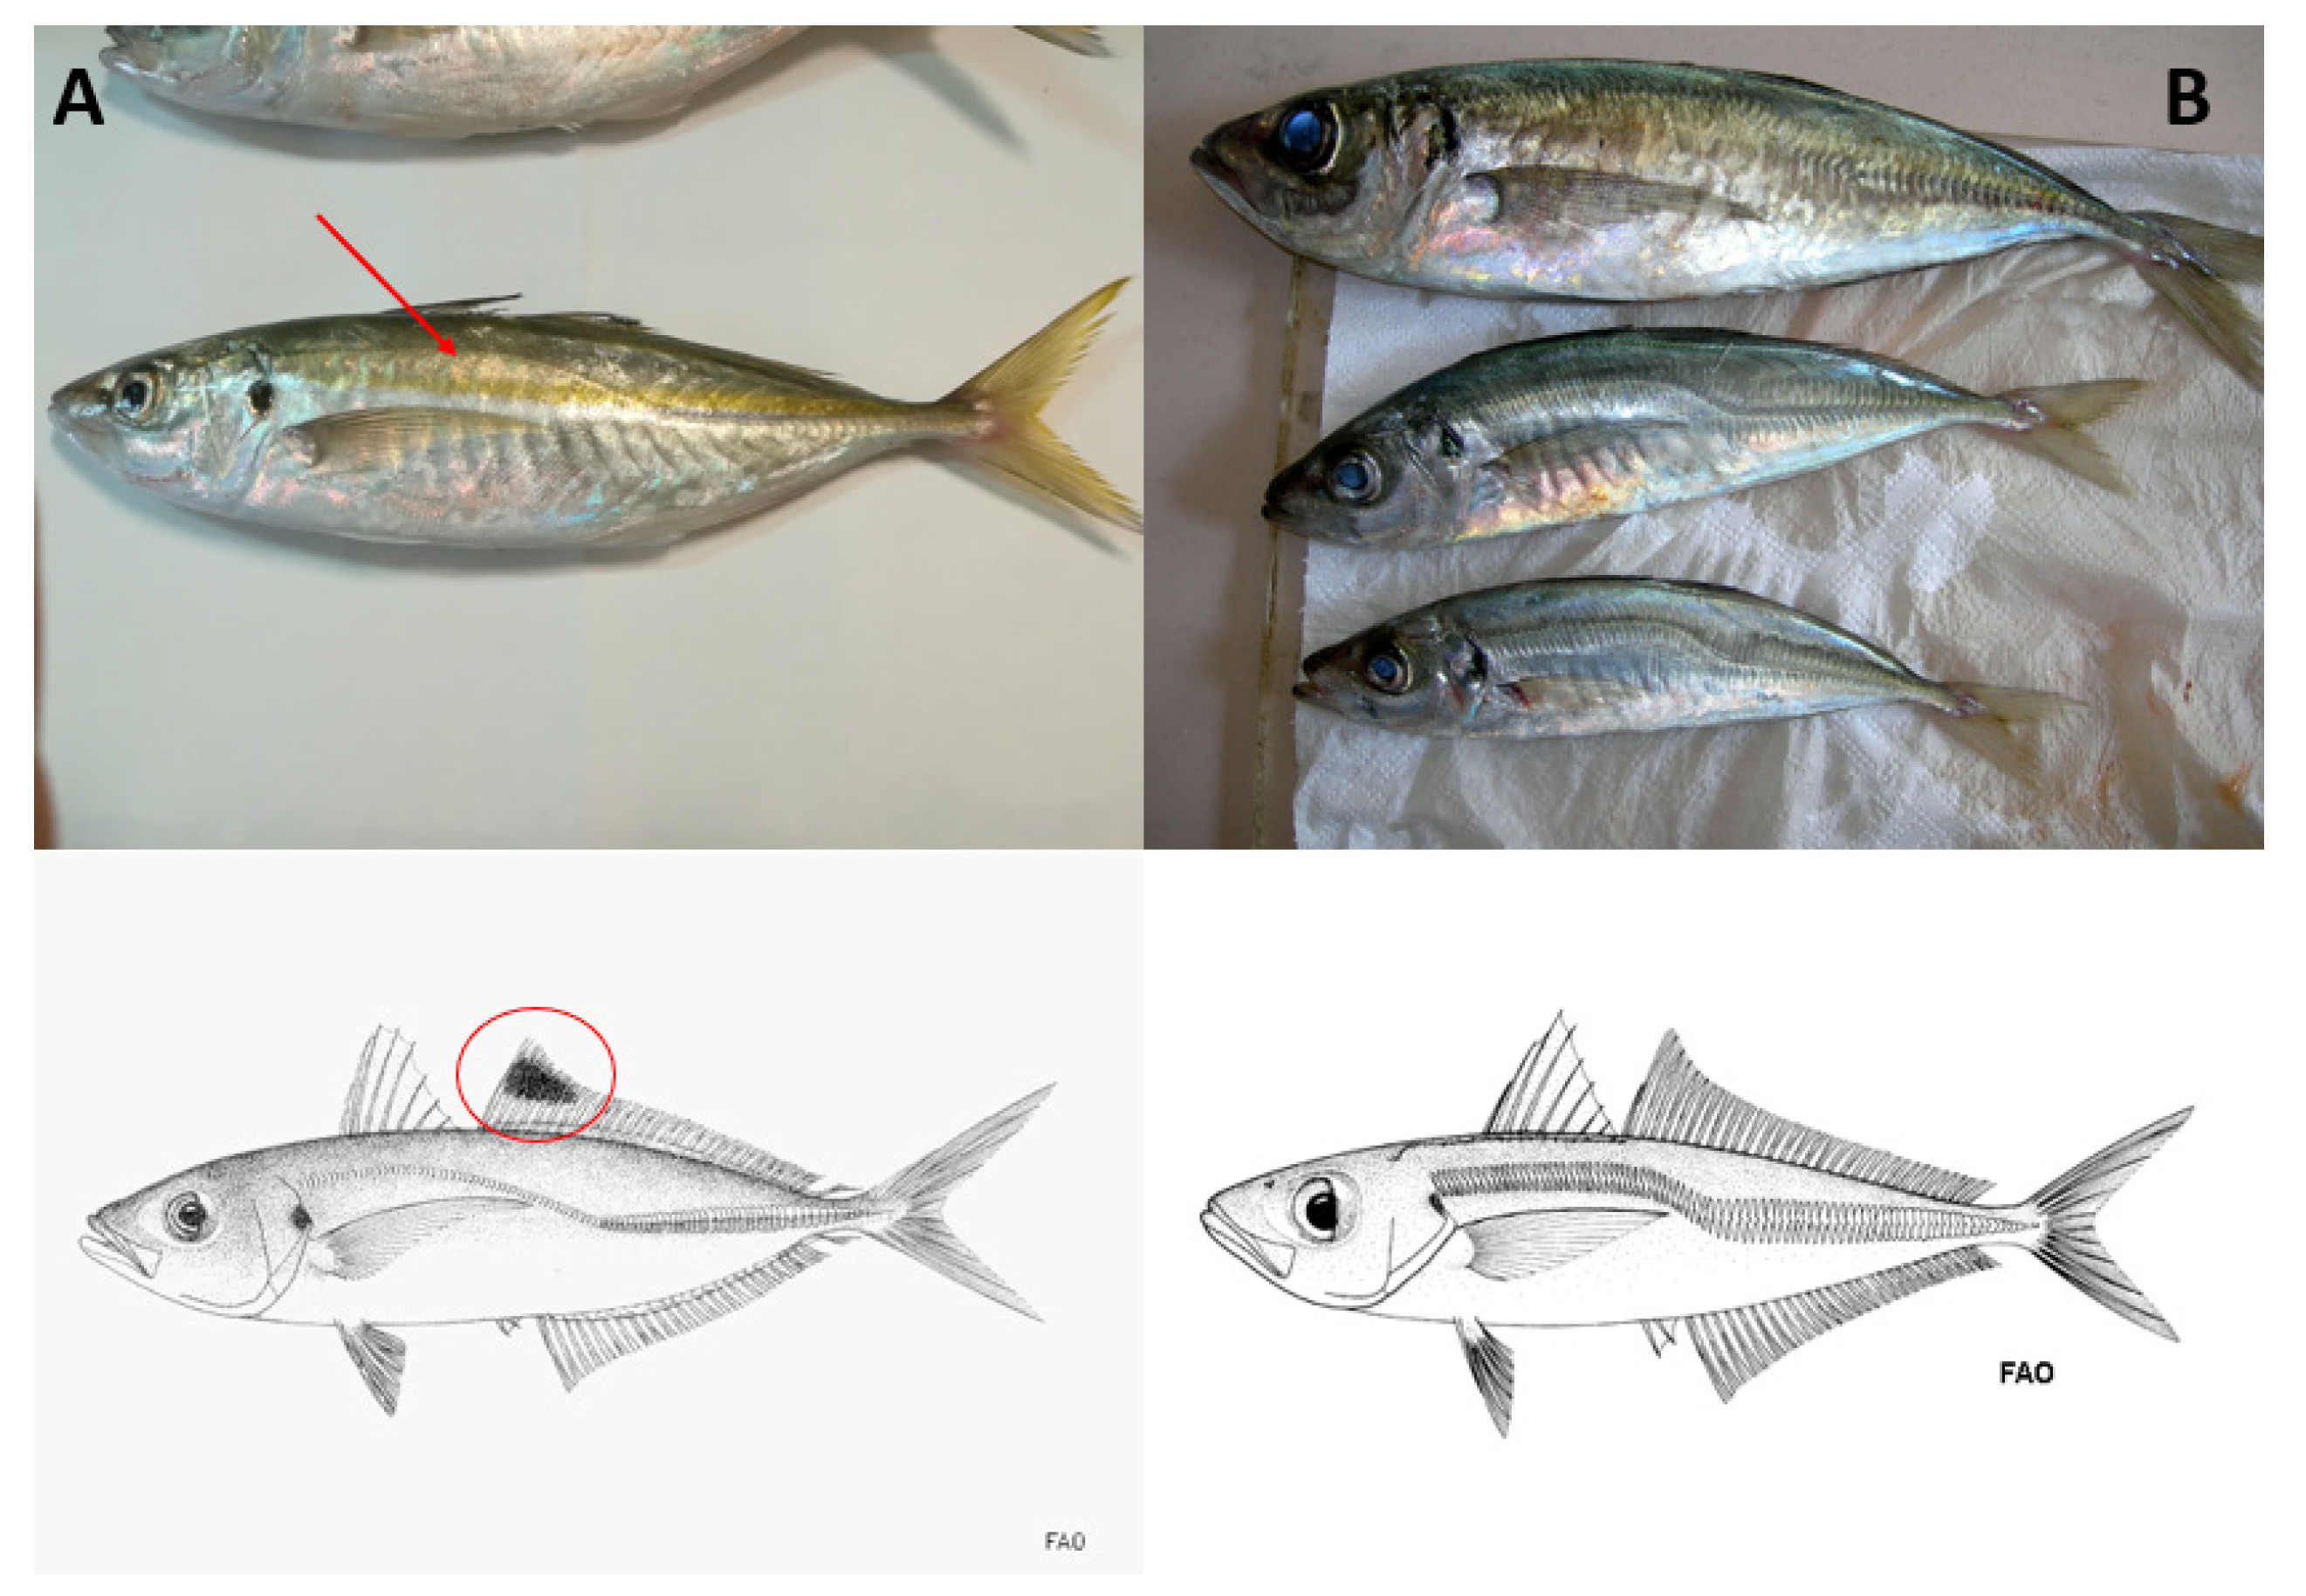 JMSE | Free Full-Text | Meridionalization as a Possible Resource for  Fisheries: The Case Study of Caranx rhonchus Geoffroy Saint-Hilaire, 1817,  in Southern Italian Waters